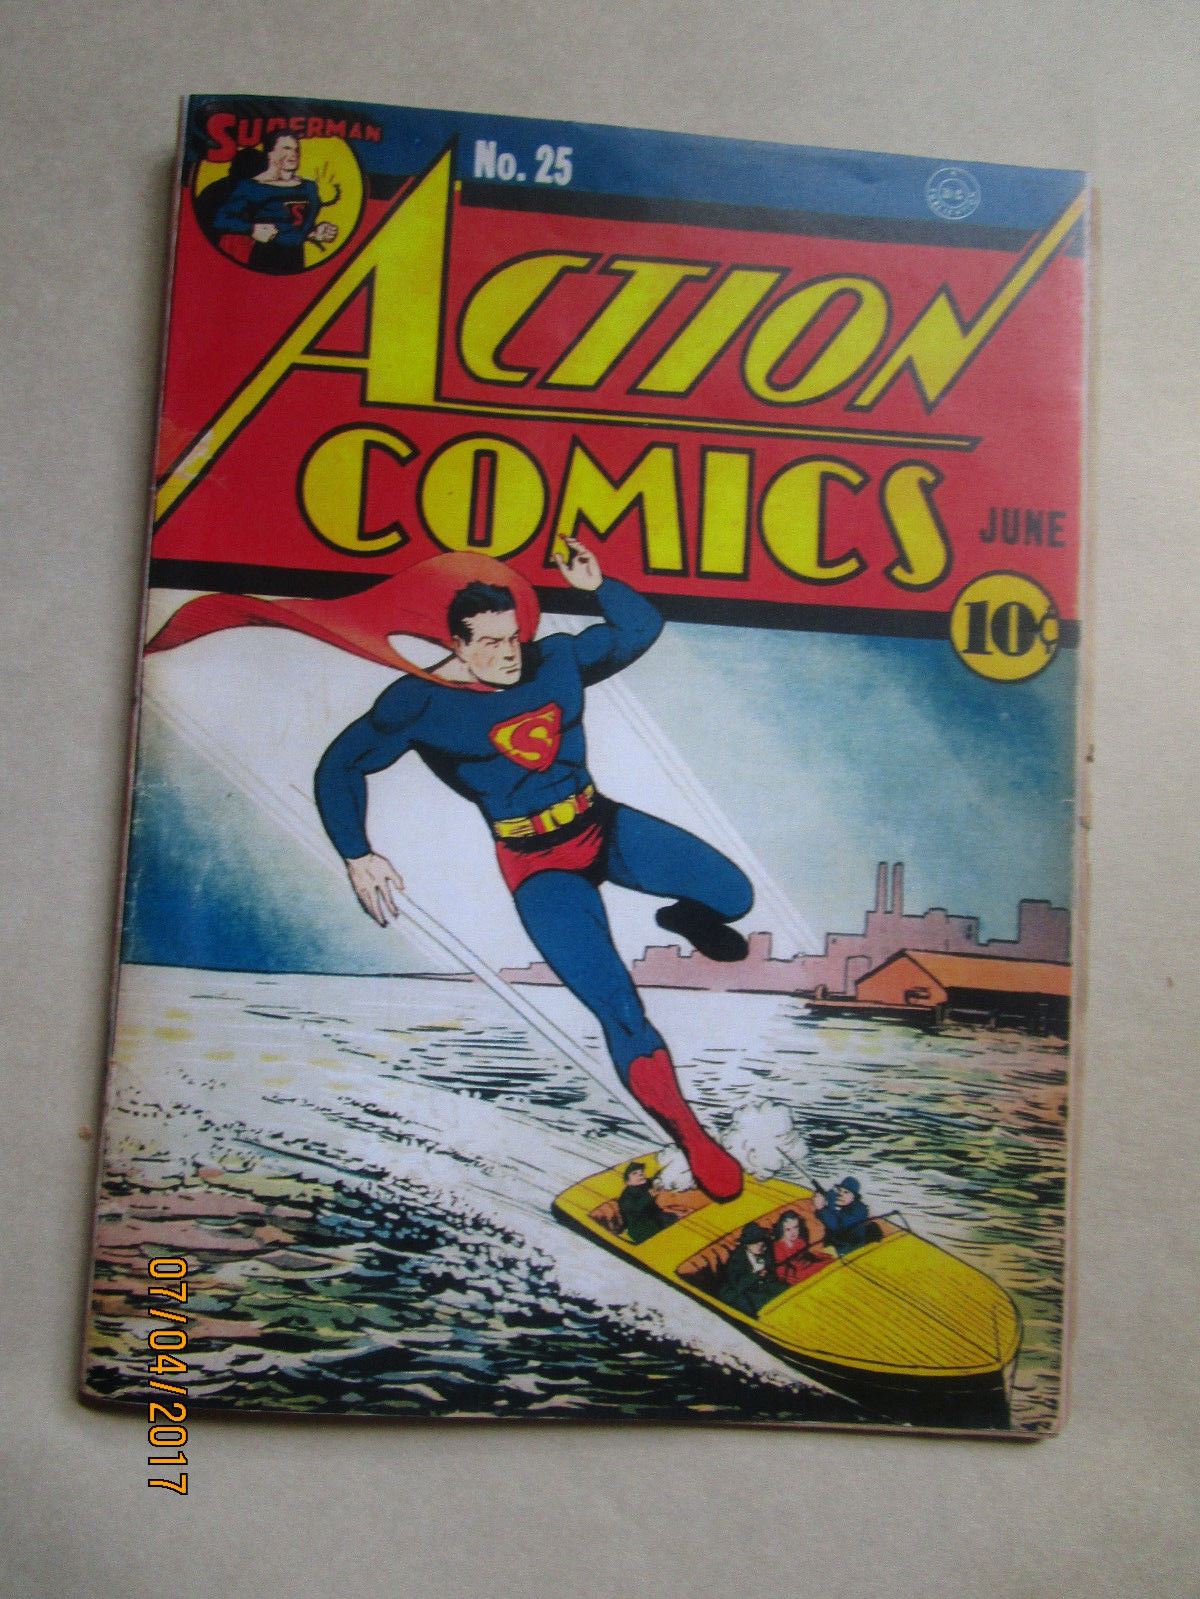 ACTION COMICS # 25 - COVERLESS BUT OTHERWISE COMPLETE - 1940 ISSUE